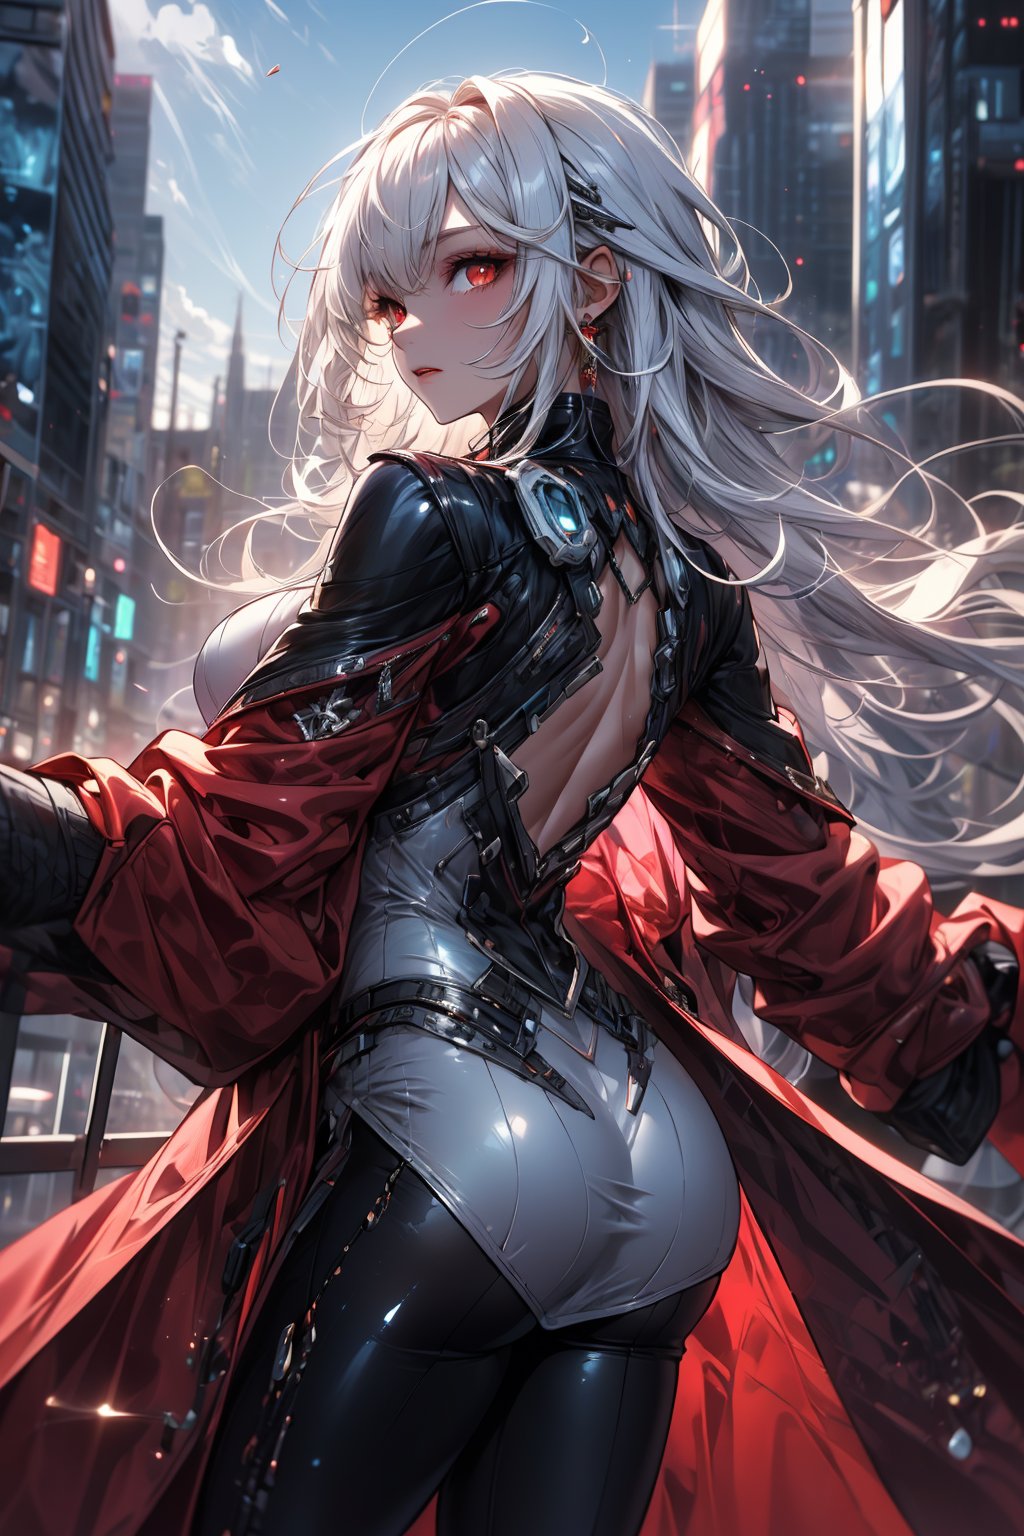 (1girl, long, scarlet hair, red eyes, medium hair, medium breasts, coat, long coat, red coat), (1boy, tall, white hair, red eyes, suit, black suit), fullbody, city, back to back, looking at viewer, aerial_view,perfect,yuzu,hand,DonMC3l3st14l3xpl0r3rsXL